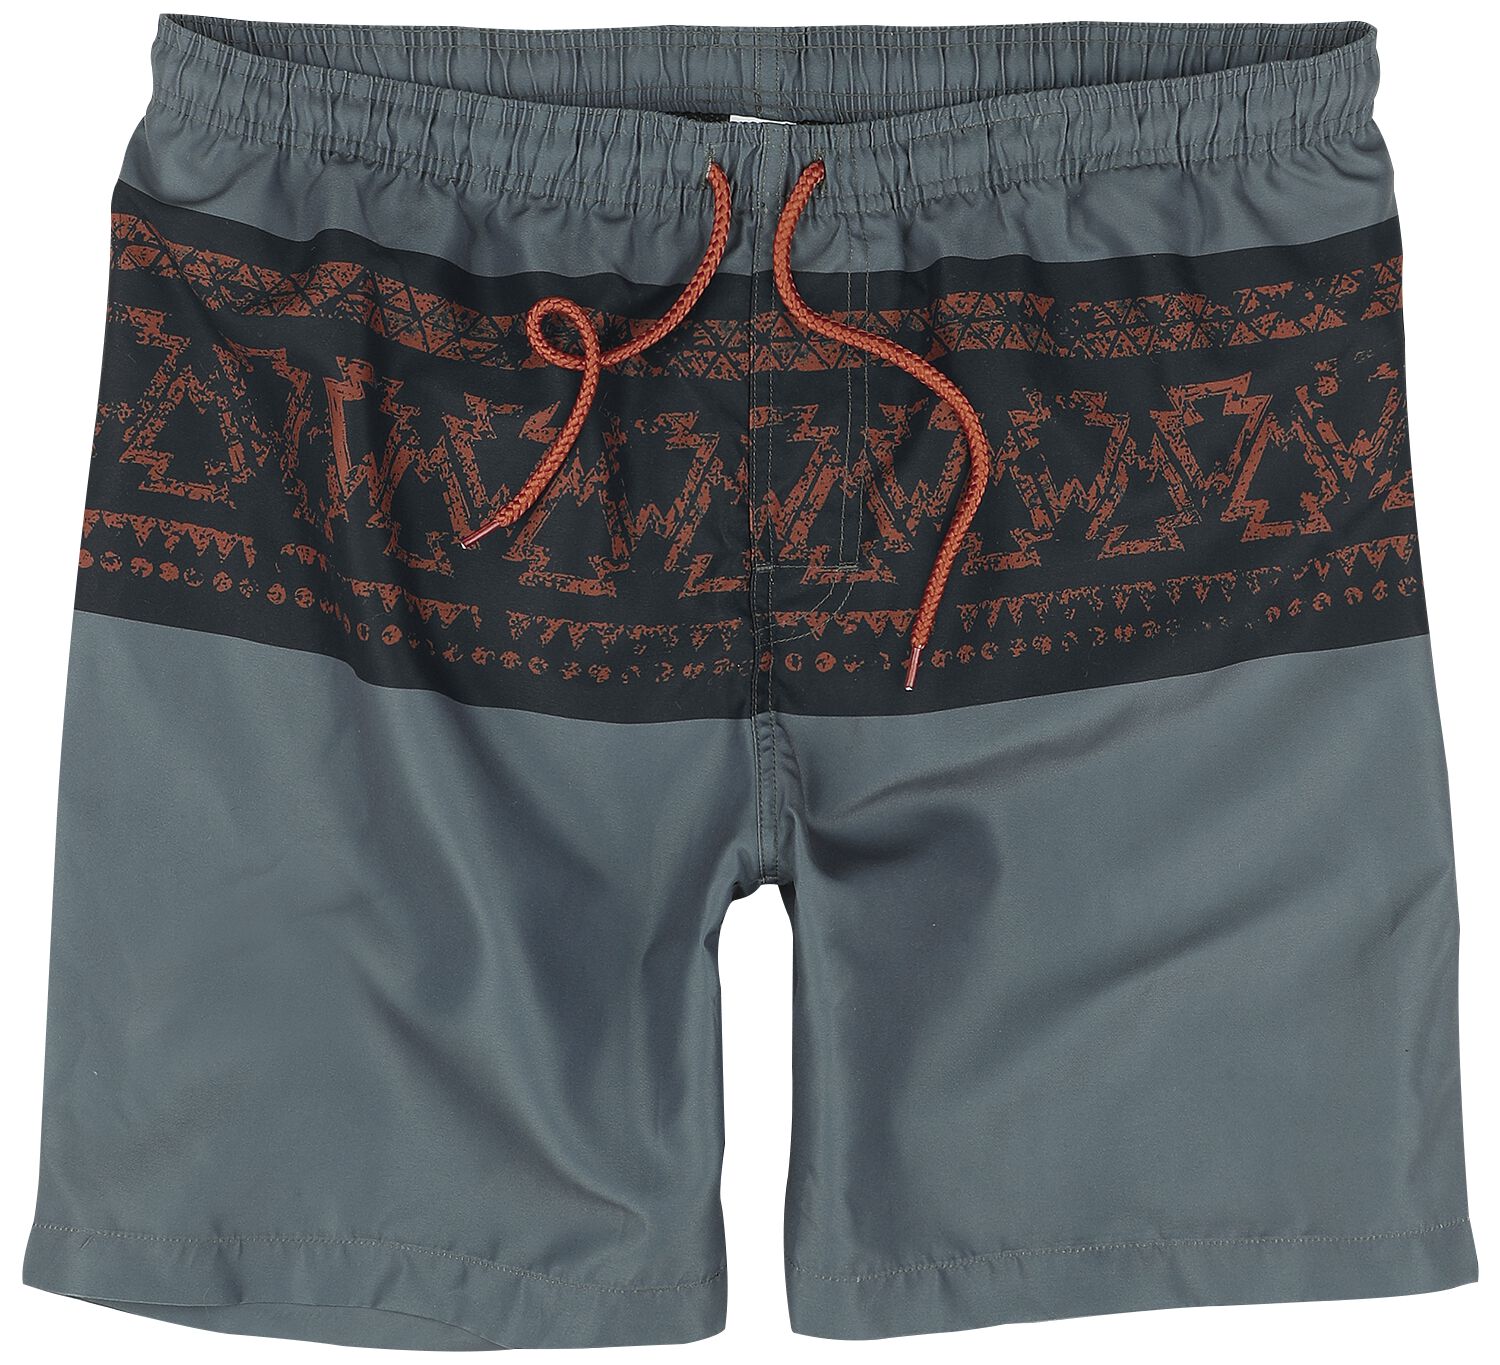 RED by EMP Swim Shorts With Graphic Design Badeshort dunkelgrau in S